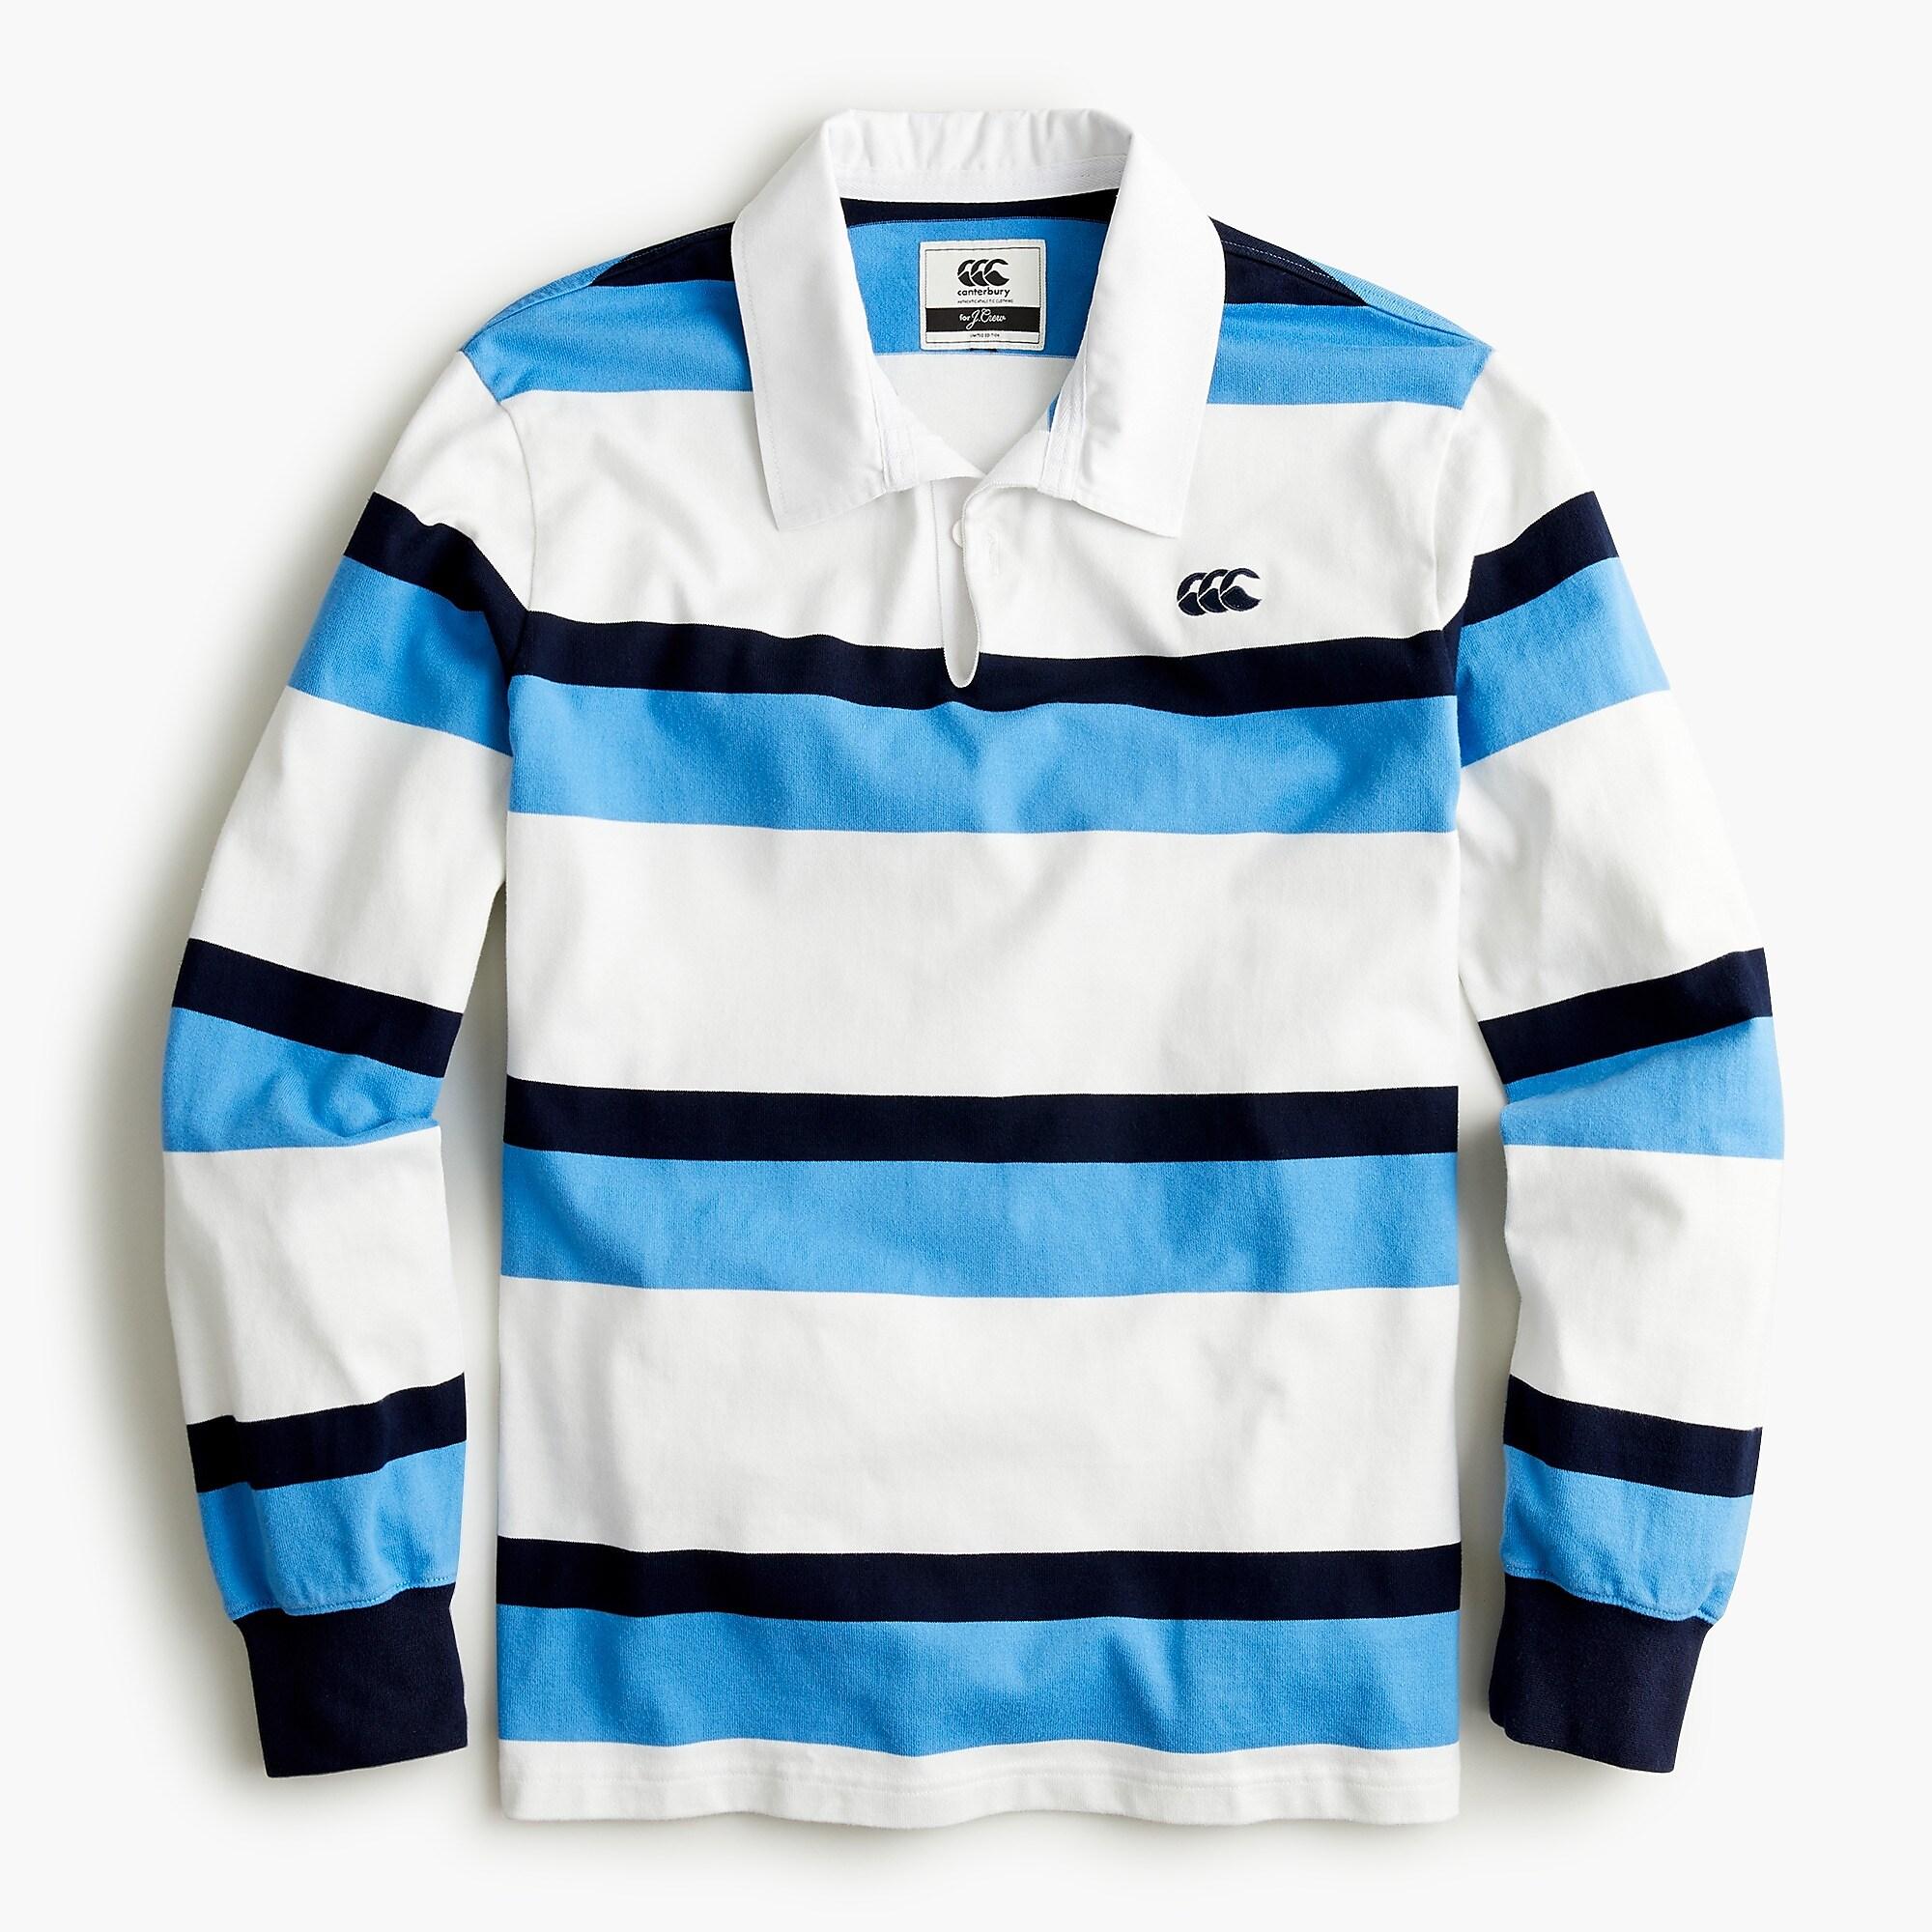 J.Crew Cotton Editions X Canterbury Rugby Shirt in Light Blue Stripe